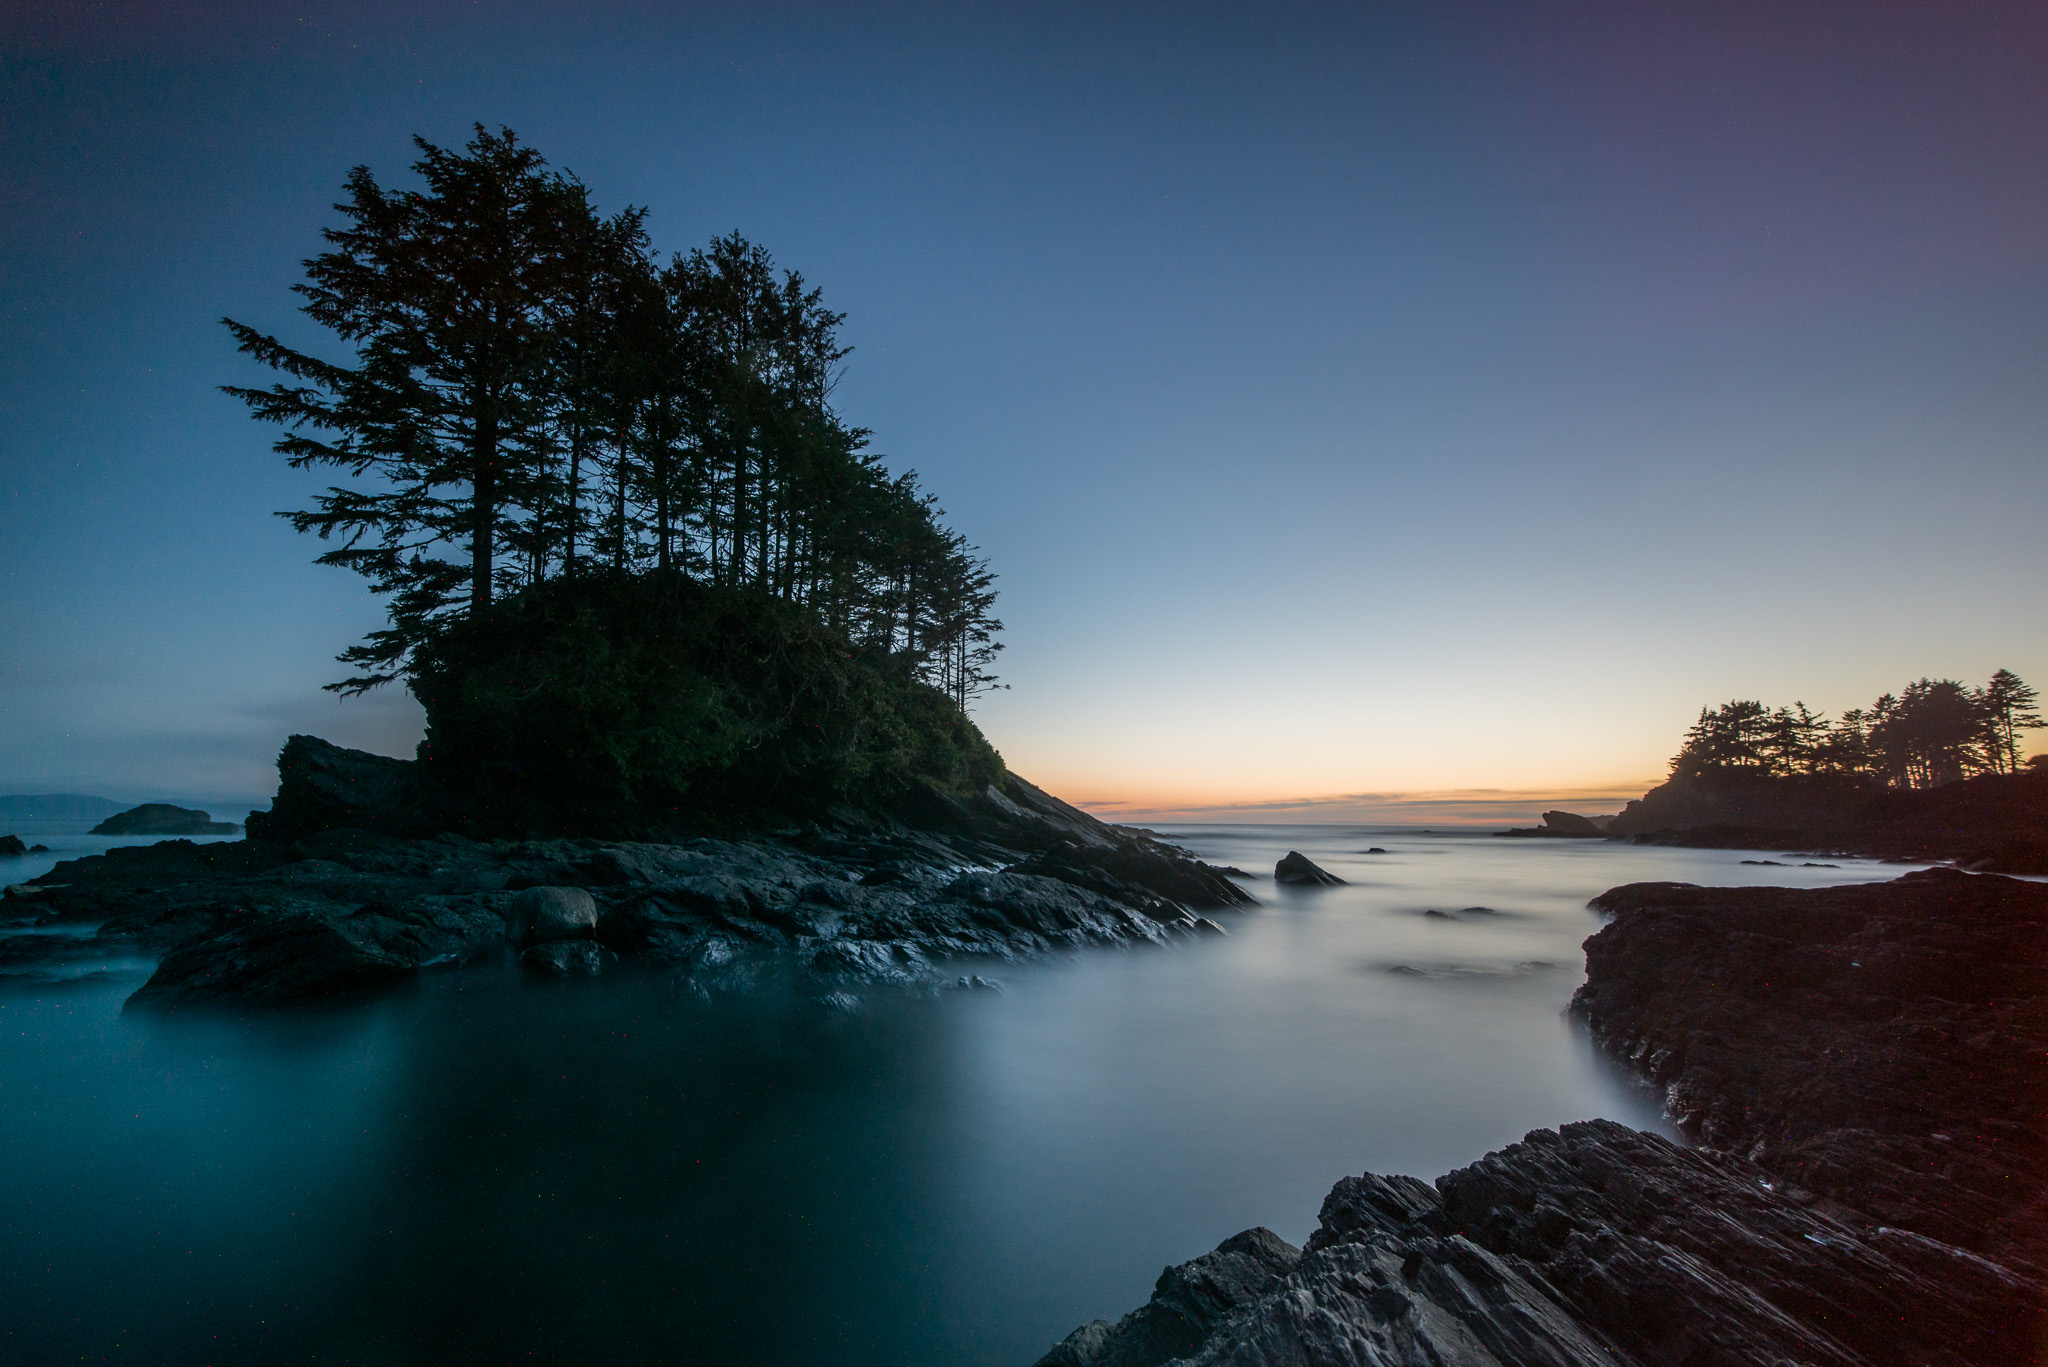  Botanical Beach near Port Renfrew.&nbsp; We had a GORGEOUS sunset on the evening we were down here, but unfortunately we weren't able to capture at its most ideal moment, because a BEAR wandered onto the scene!&nbsp; Still though.....this island mak